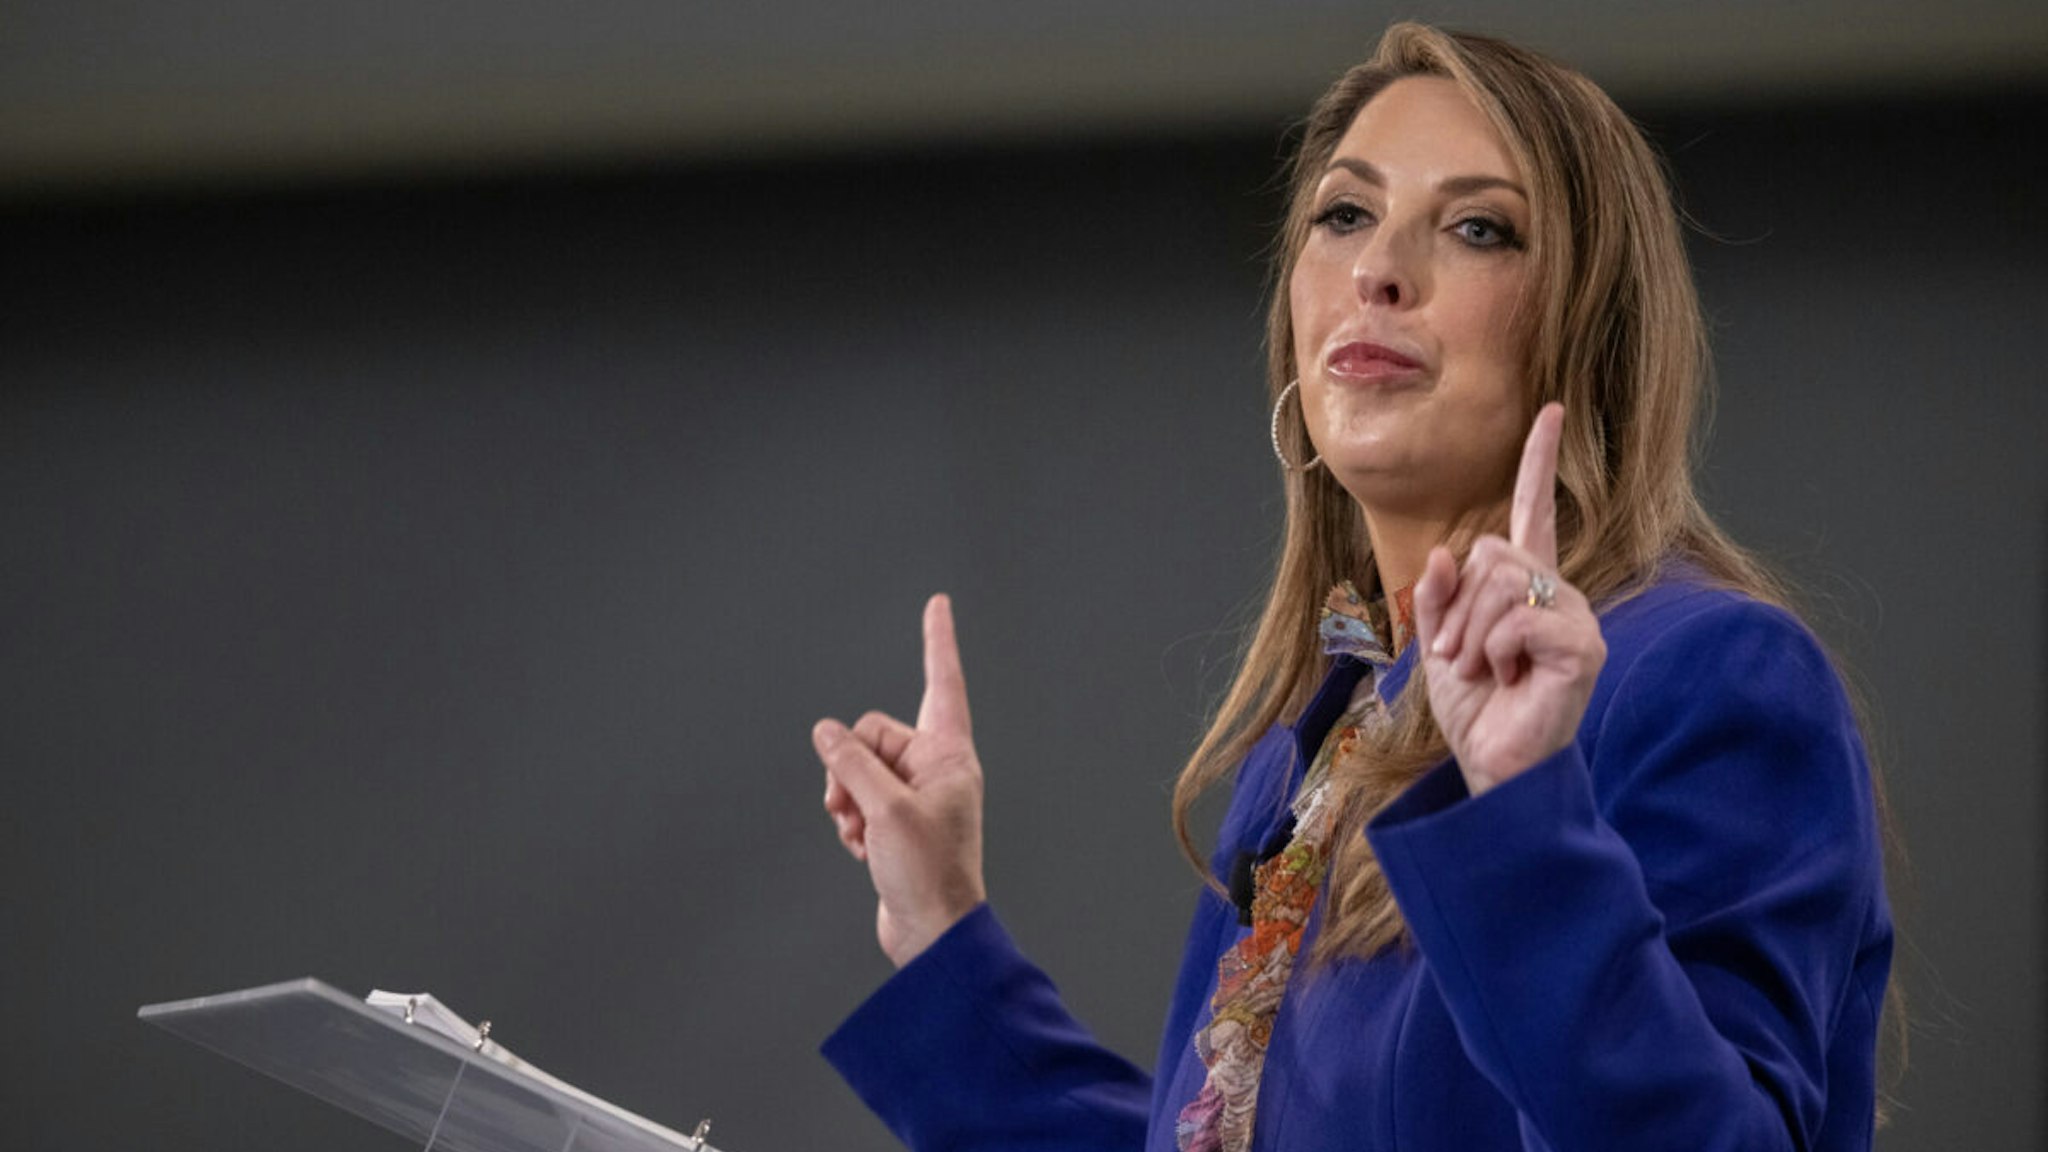 RNC Chairwoman Ronna McDaniel speaks at the Ronald Reagan Presidential Foundation & Institute's 'A Time for Choosing Speaker Series' at the Ronald Reagan Presidential Library on April 20, 2023 in Simi Valley, California.